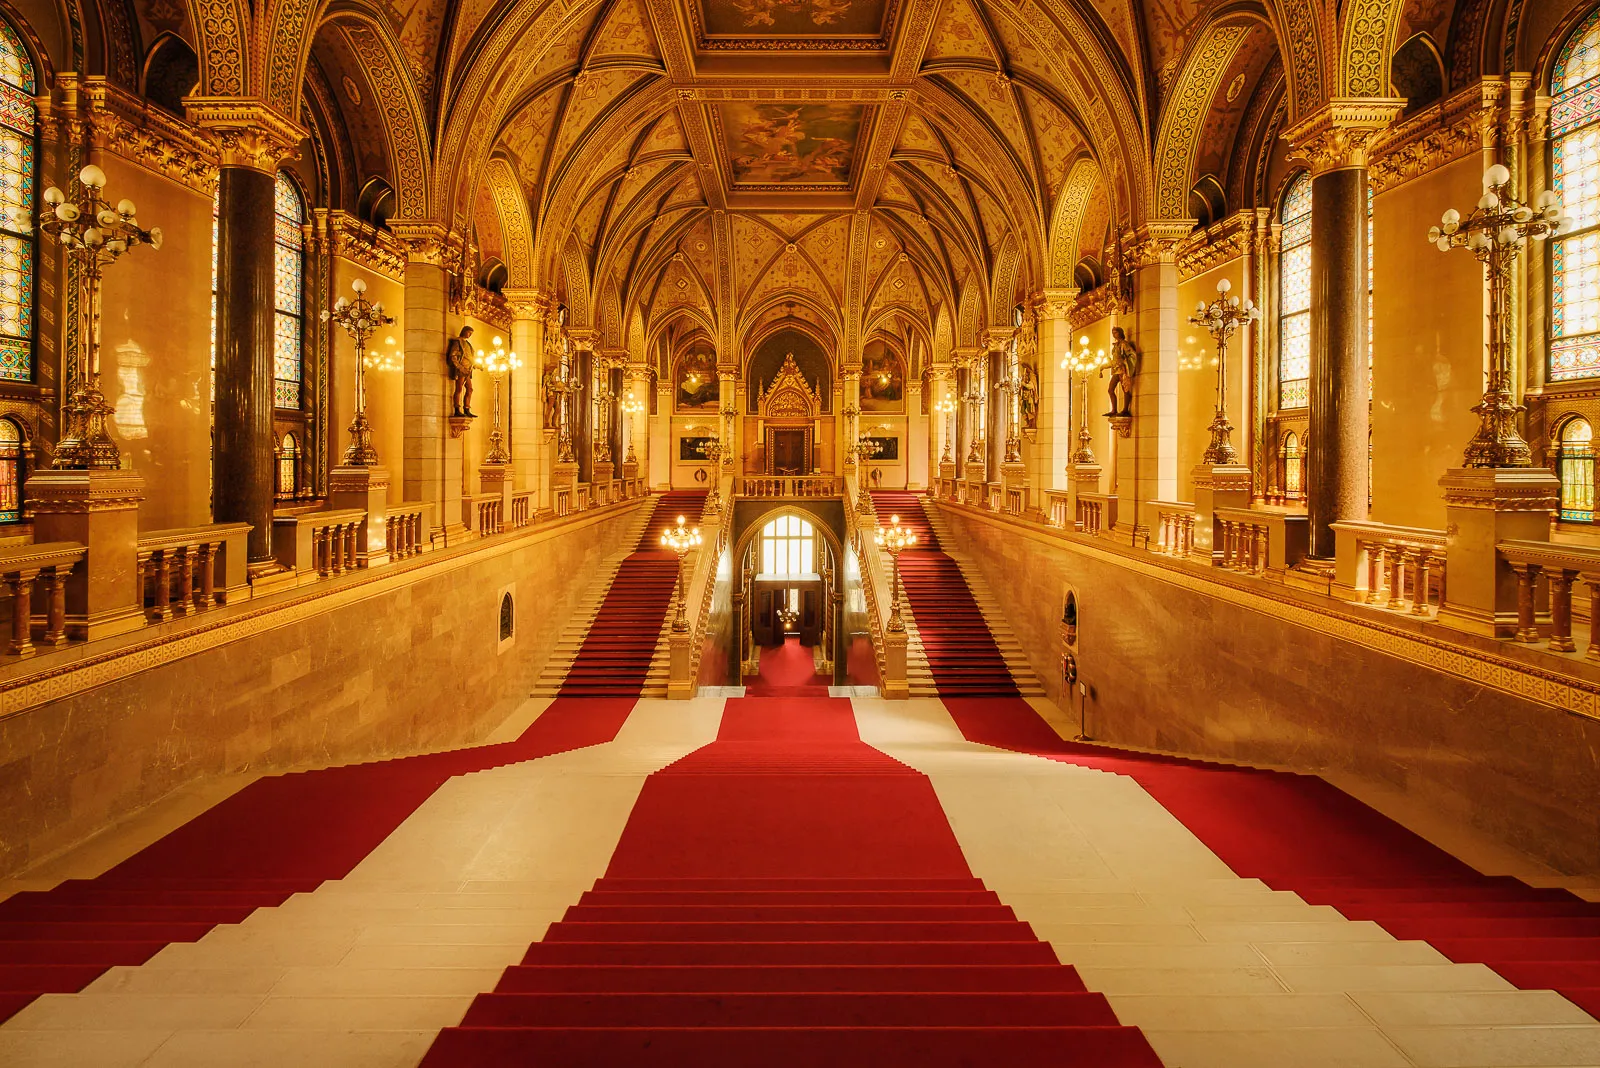 The main entrance to The Hungarian Parliament in Budapest. The interior features marble walls and gold coated decorations with statues and paintings of Hungarian history.